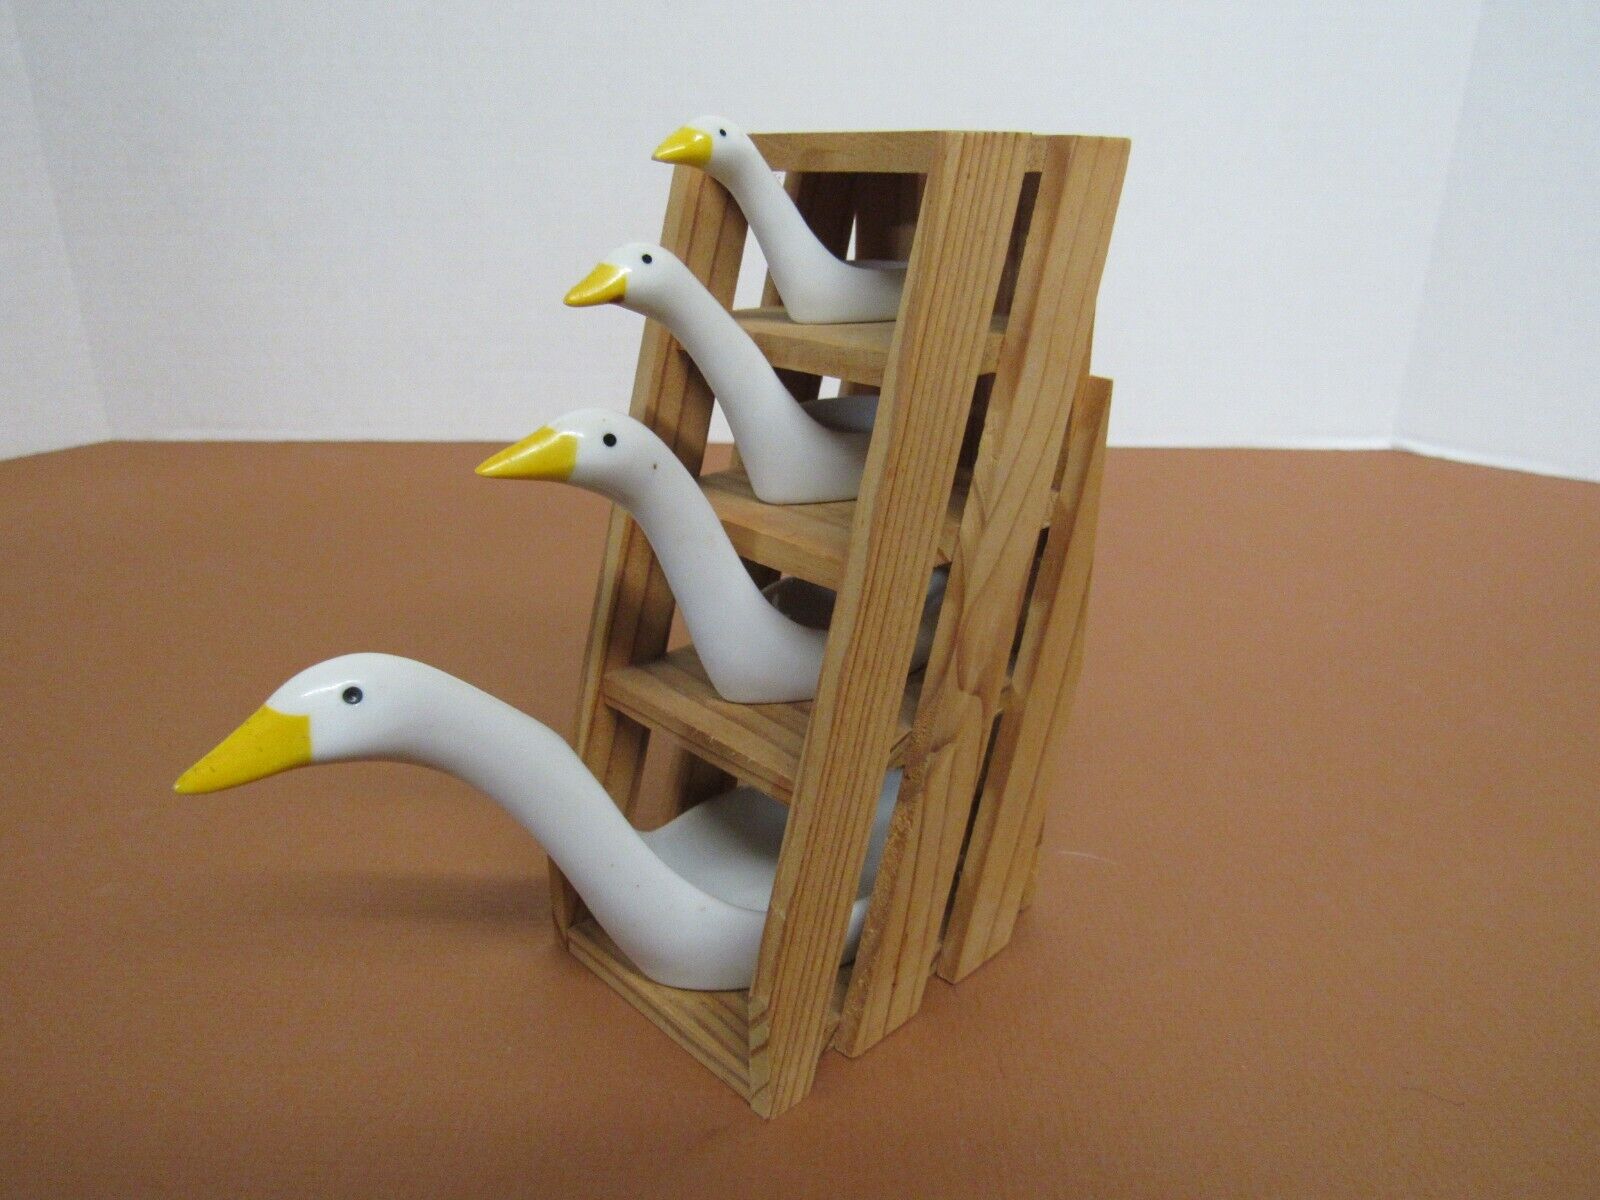 Vintage Avon Ceramic Geese Goose Measuring Spoons Set Wood Crate Stand Complete